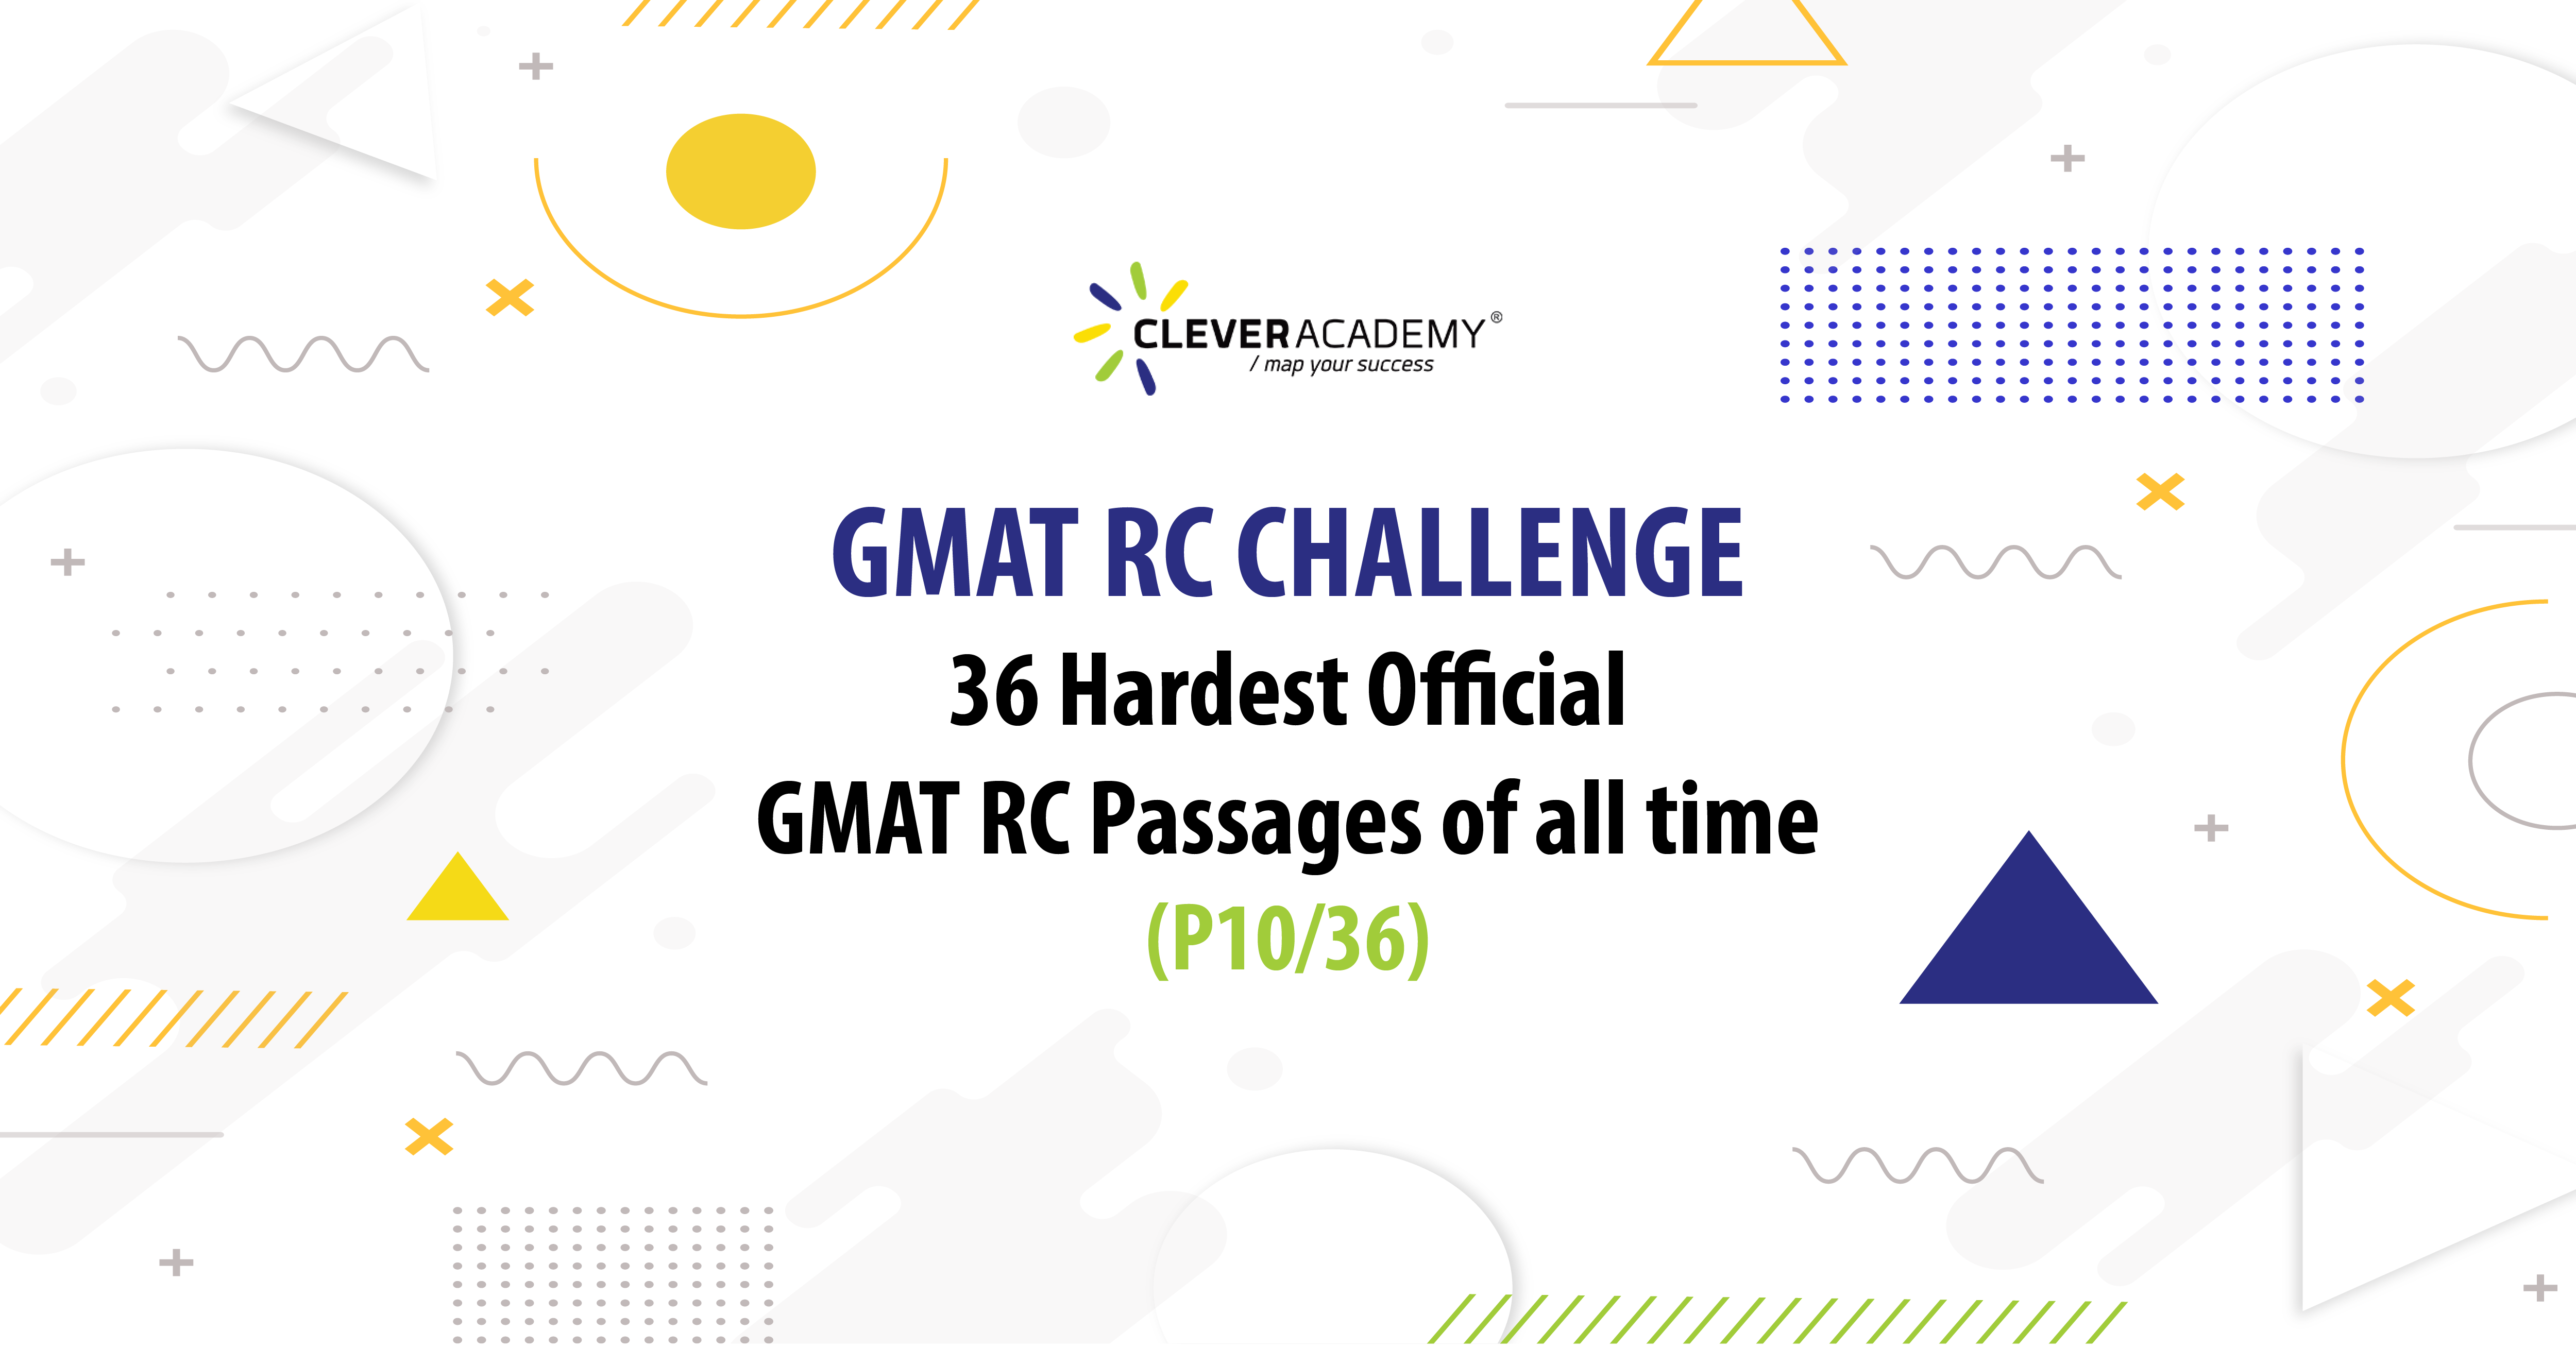 GMAT RC CHALLENGE – 36 Hardest Official GMAT RC Passages of all time (P10/36)